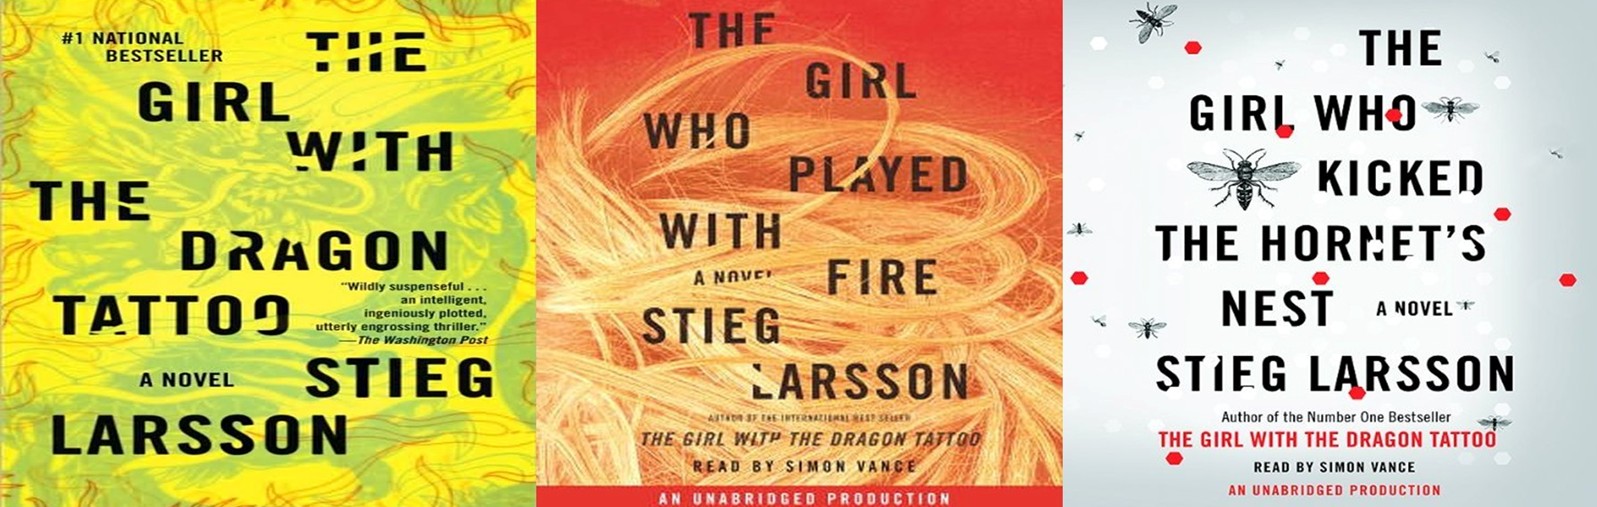 The girl who played with fire audio book download torrent 2017